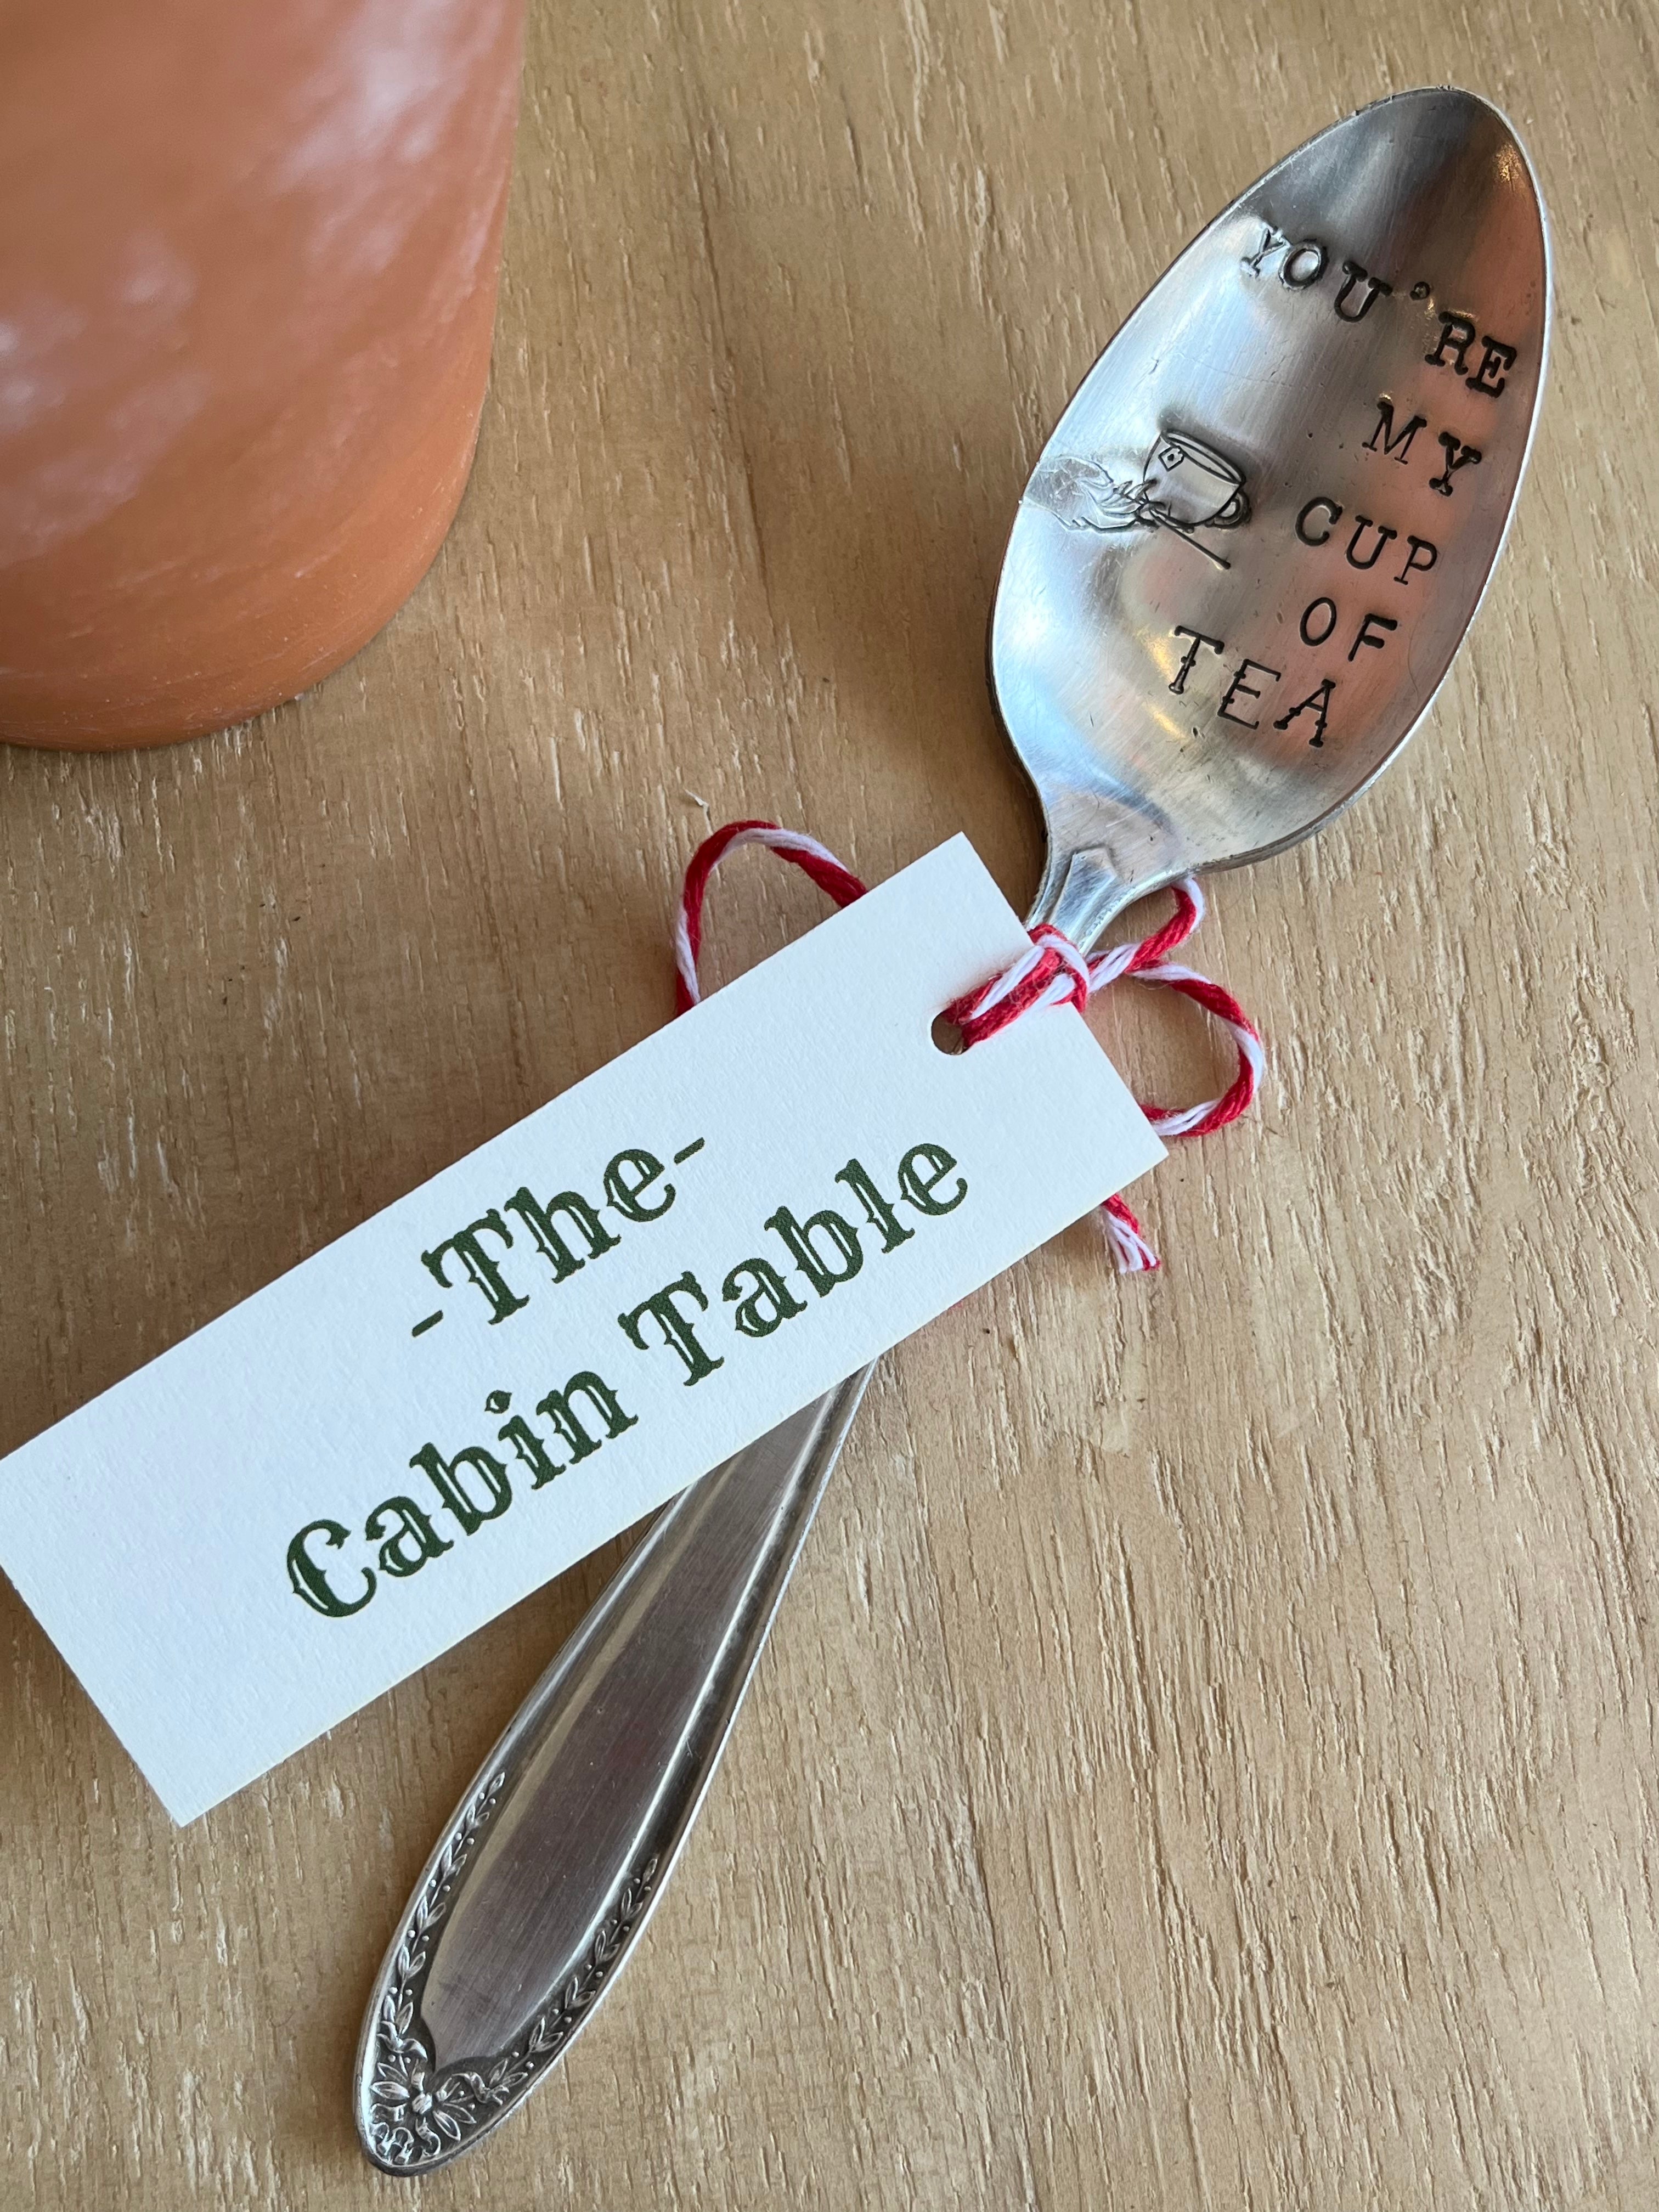 You're My Cup of Tea - Stamped Spoons from the Cabin Table